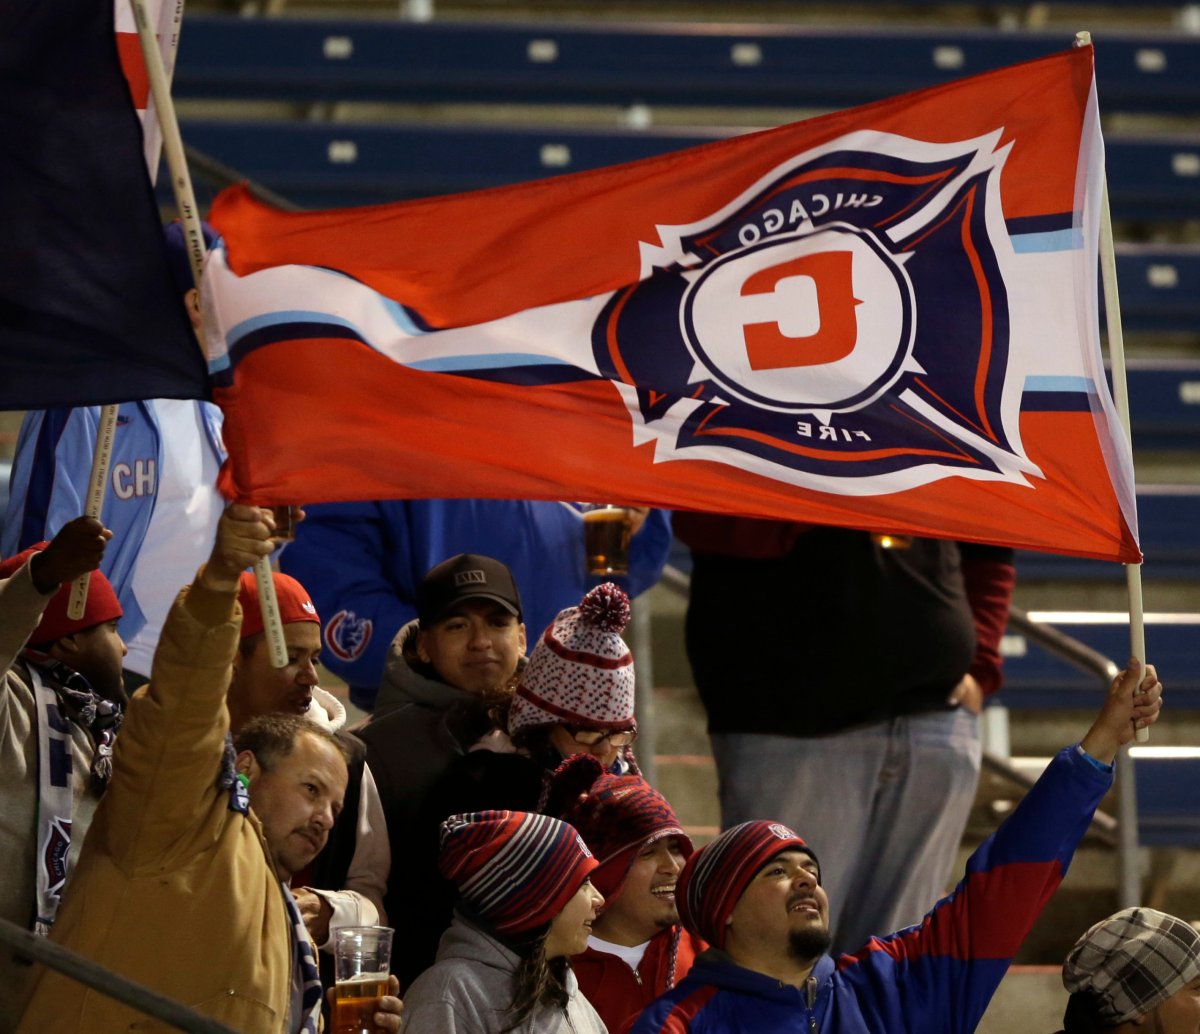 Chicago Fire FC may trade top selection for MLS draft